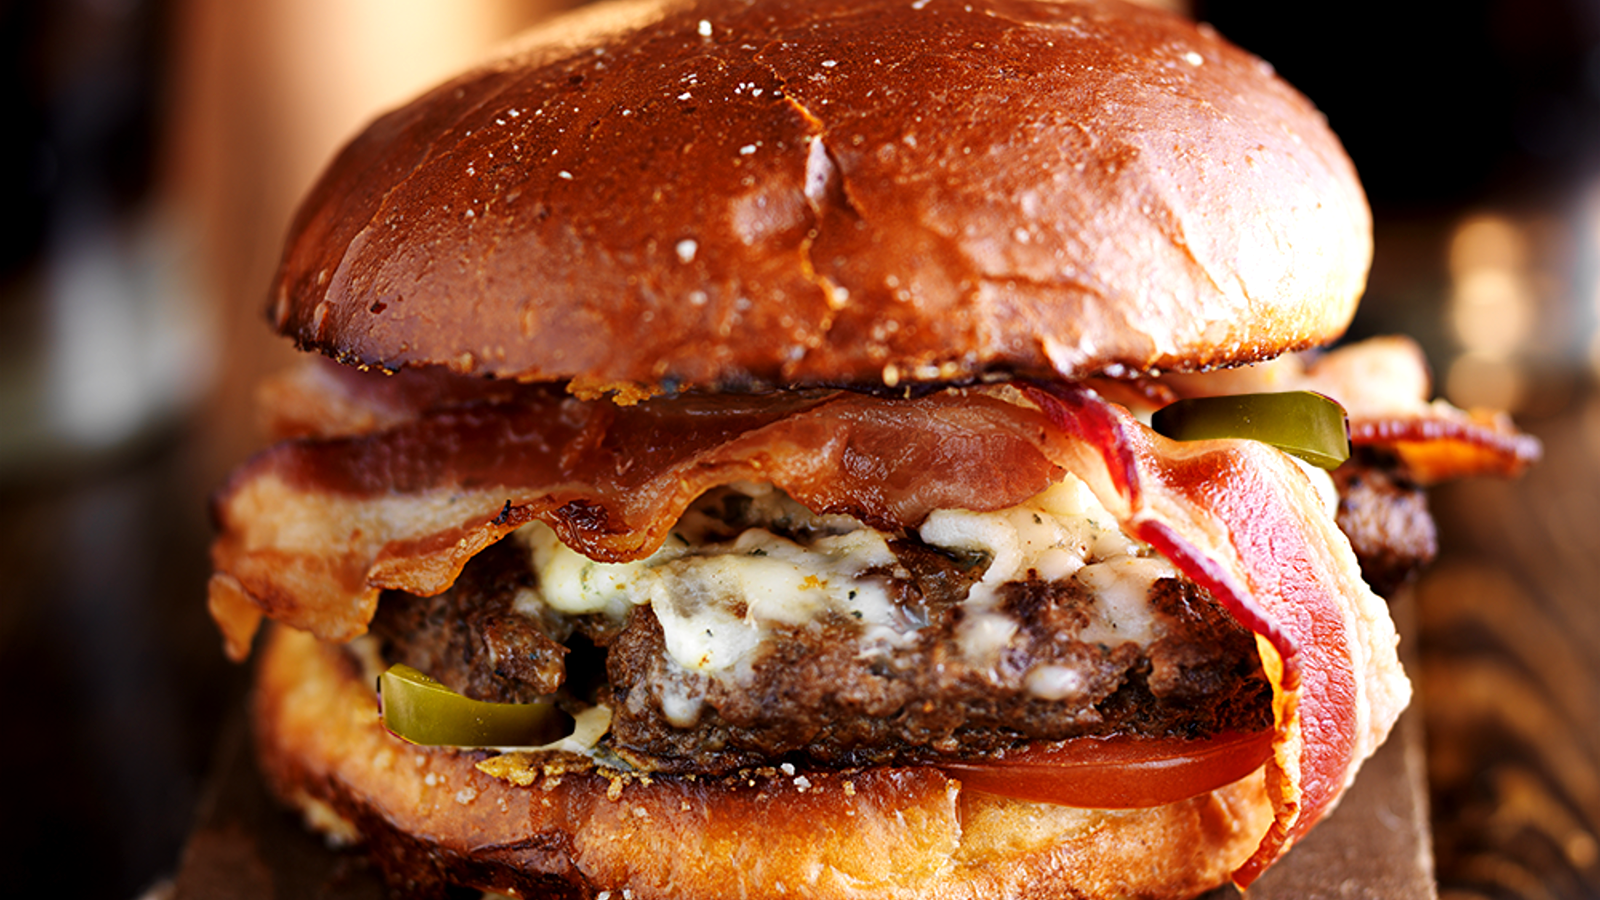 Image of Grilled Jalapeno and Onion Bison Bacon Burger